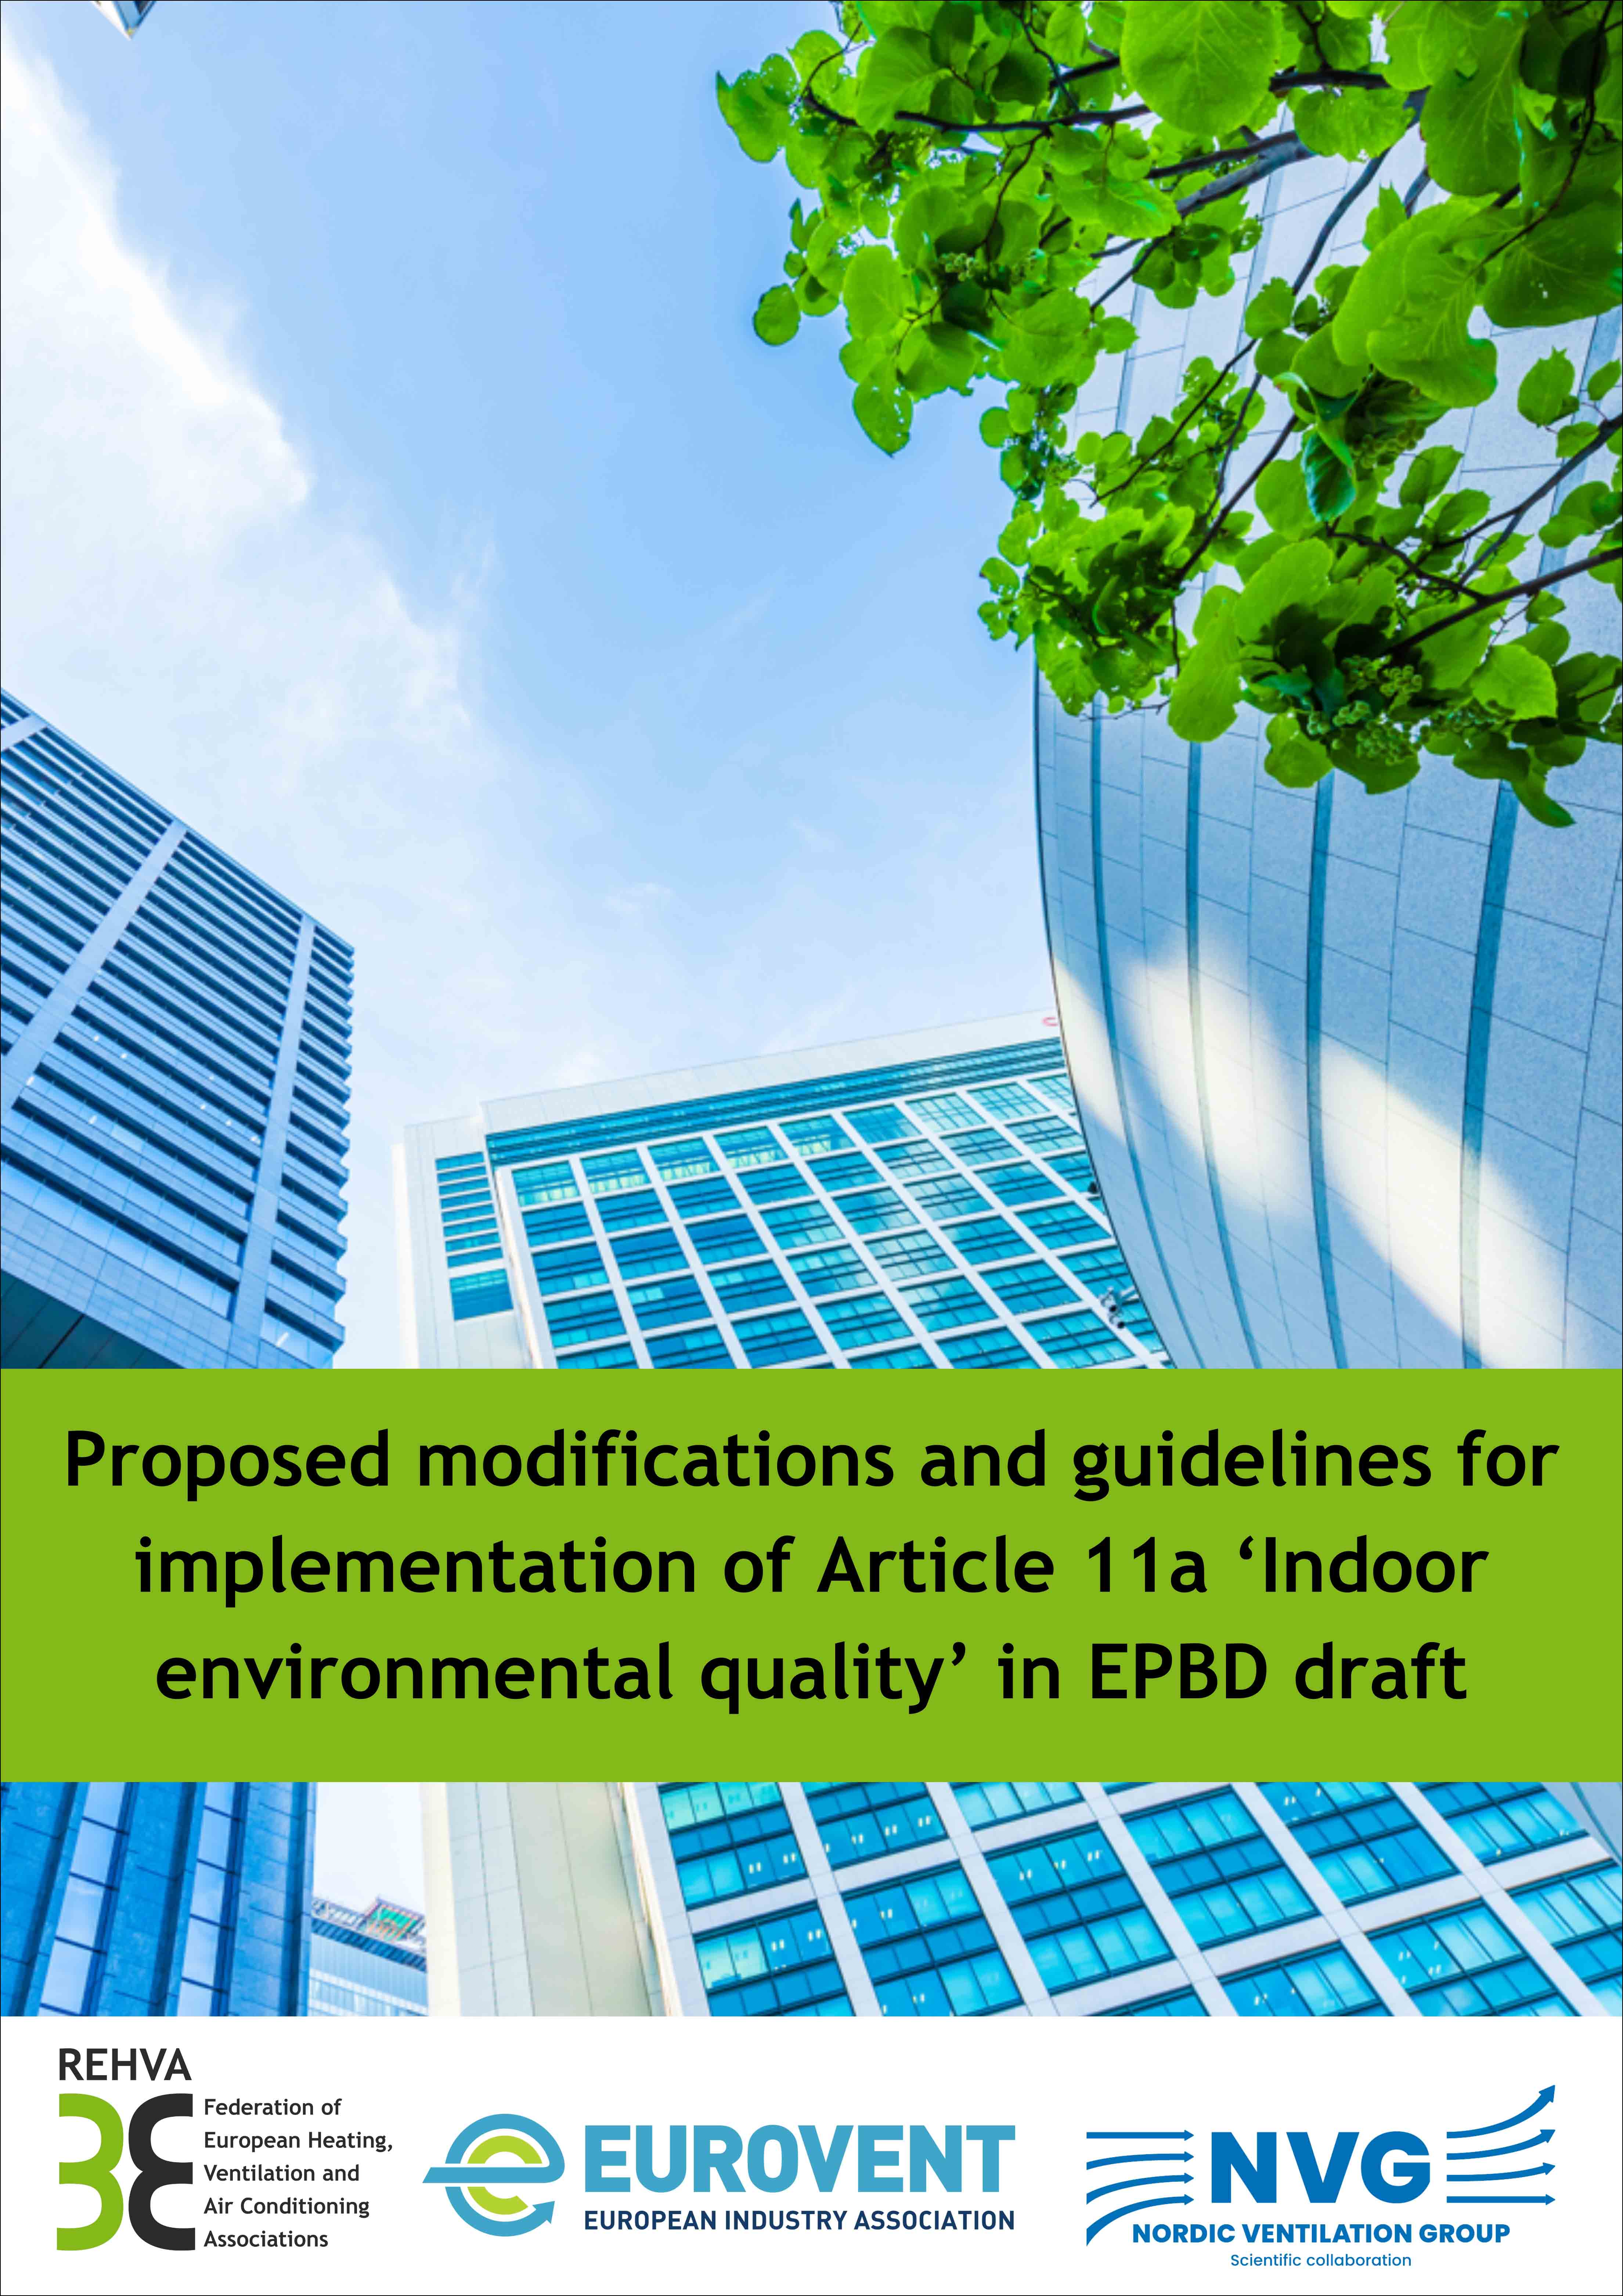 Proposed modifications and guidelines for implementation of Article 11a ‘Indoor environmental quality’ in EPBD draft